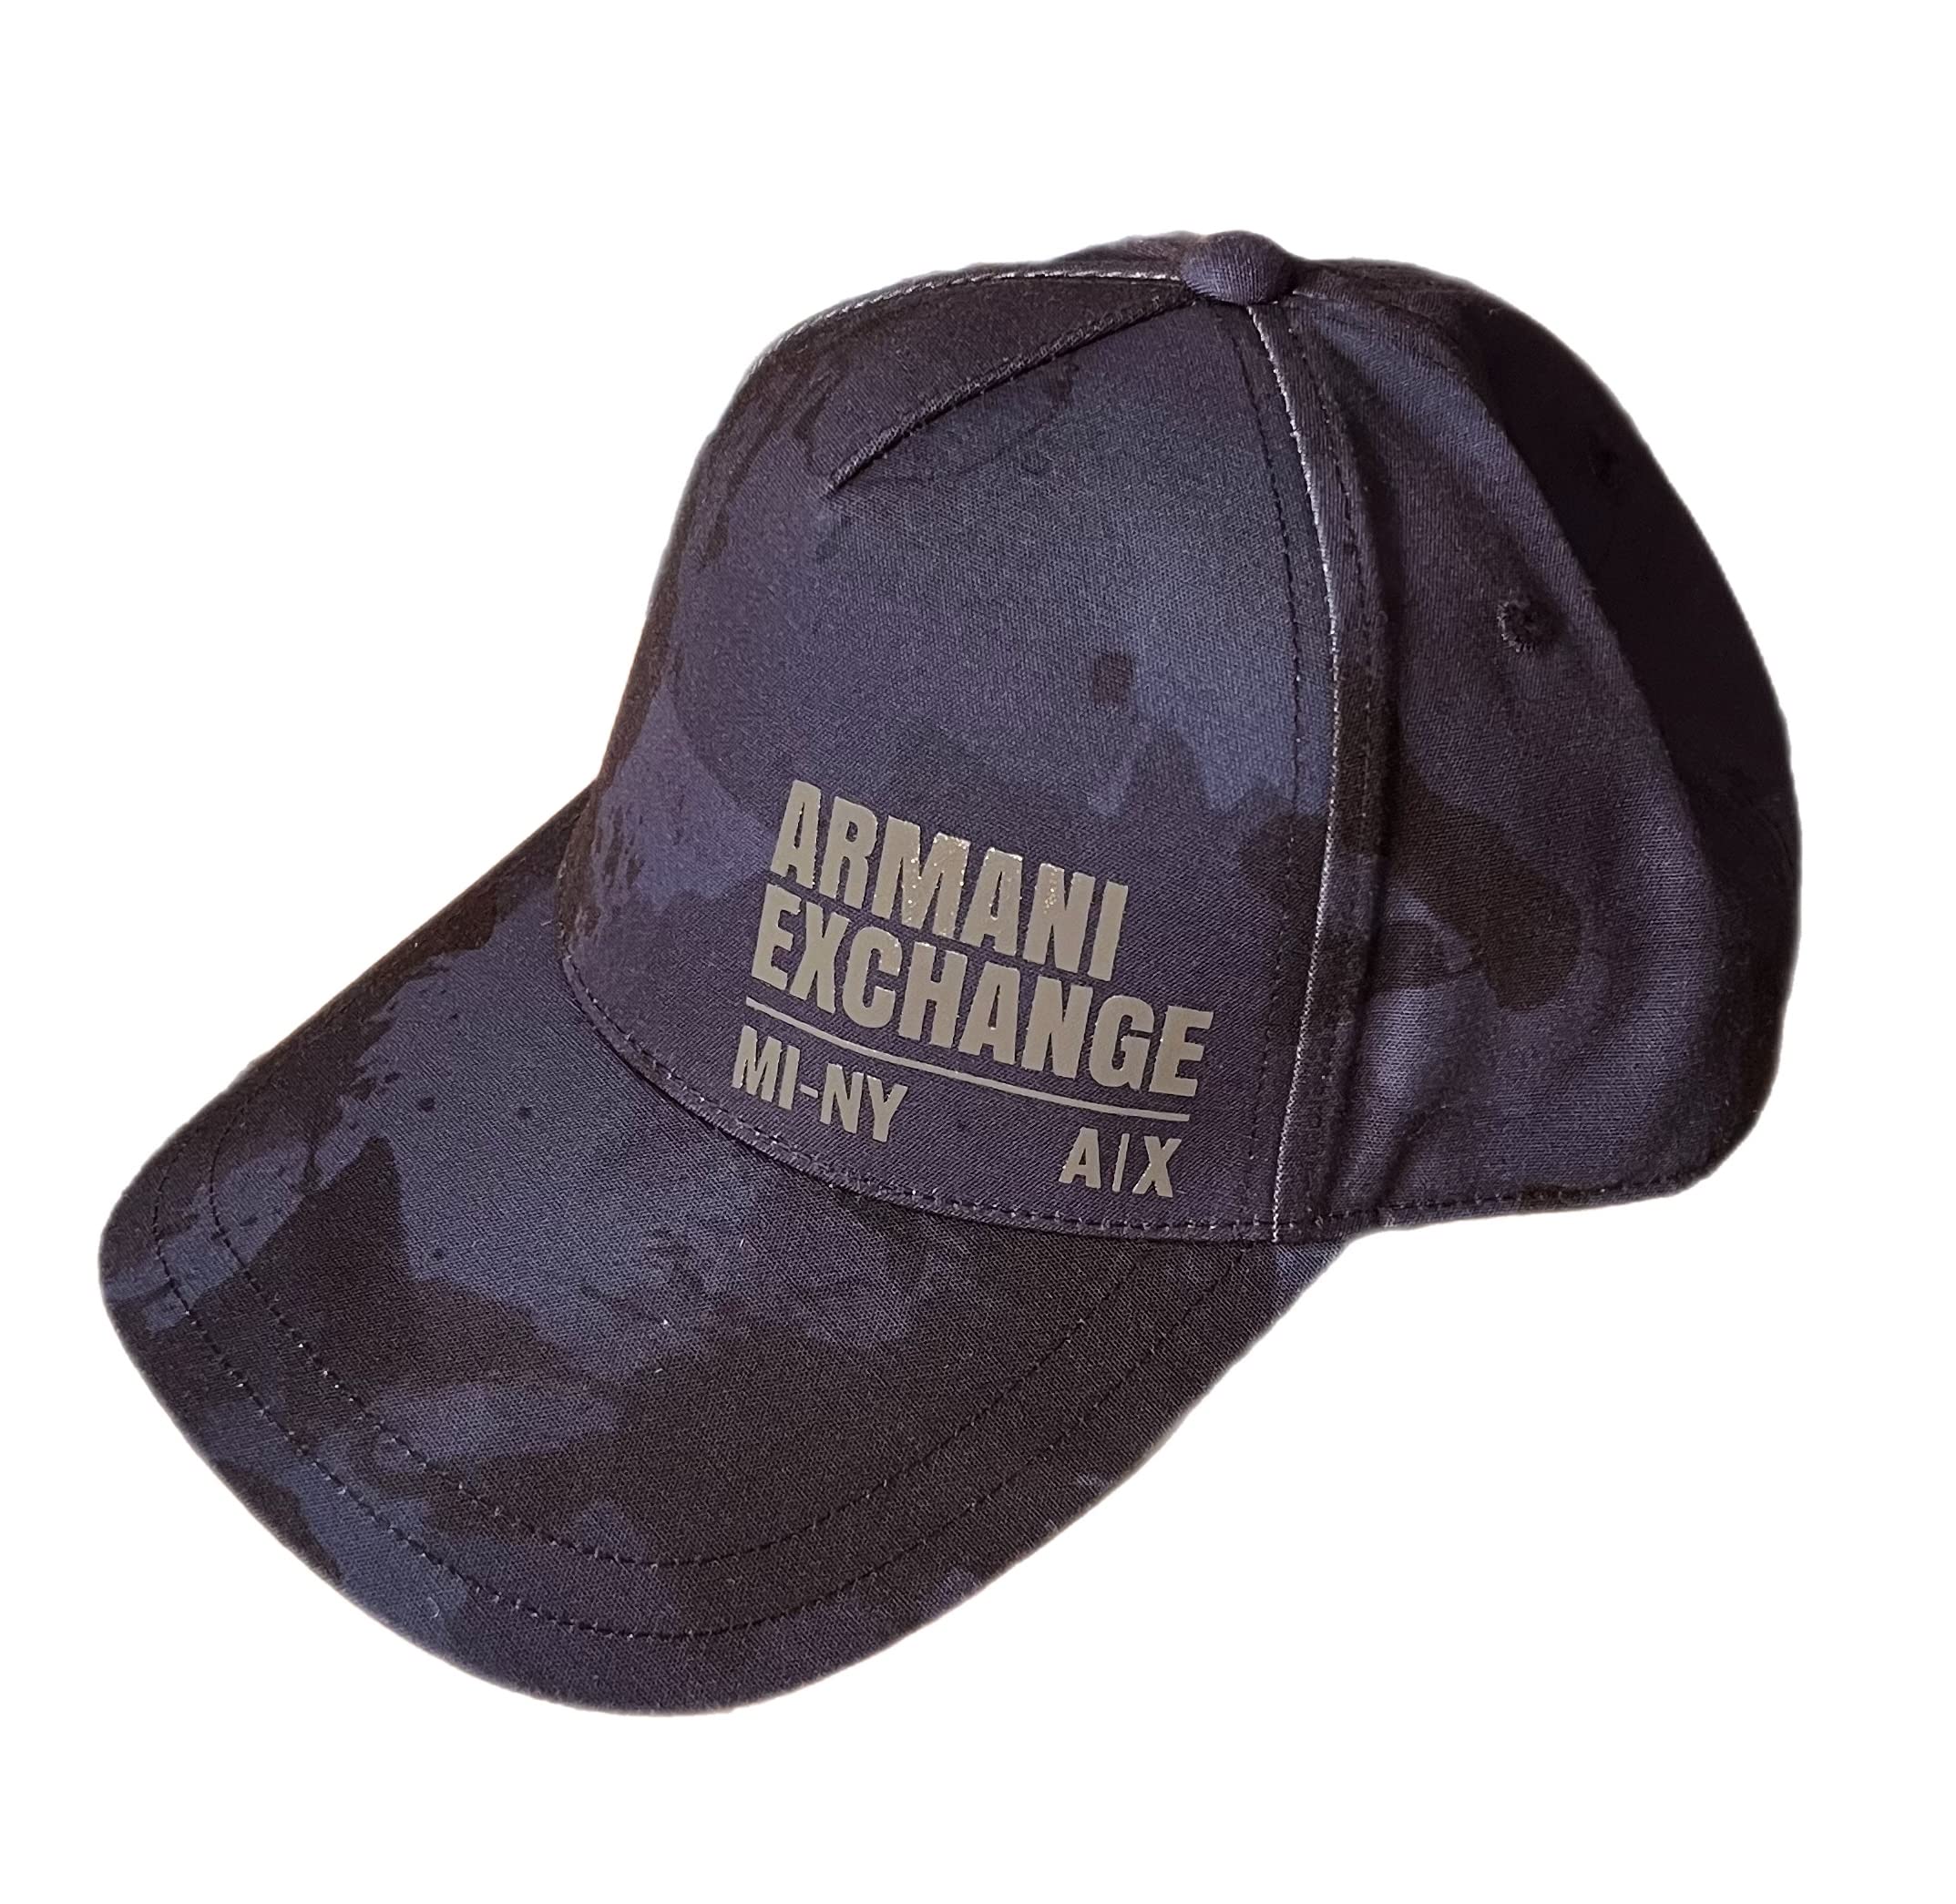 A | X ARMANI EXCHANGE Men's Camo Logo Baseball Hat, Watercolor Navy Allover Print, OS - Caps Fitted Caps Fitted A｜X ARMANI EXCHANGE